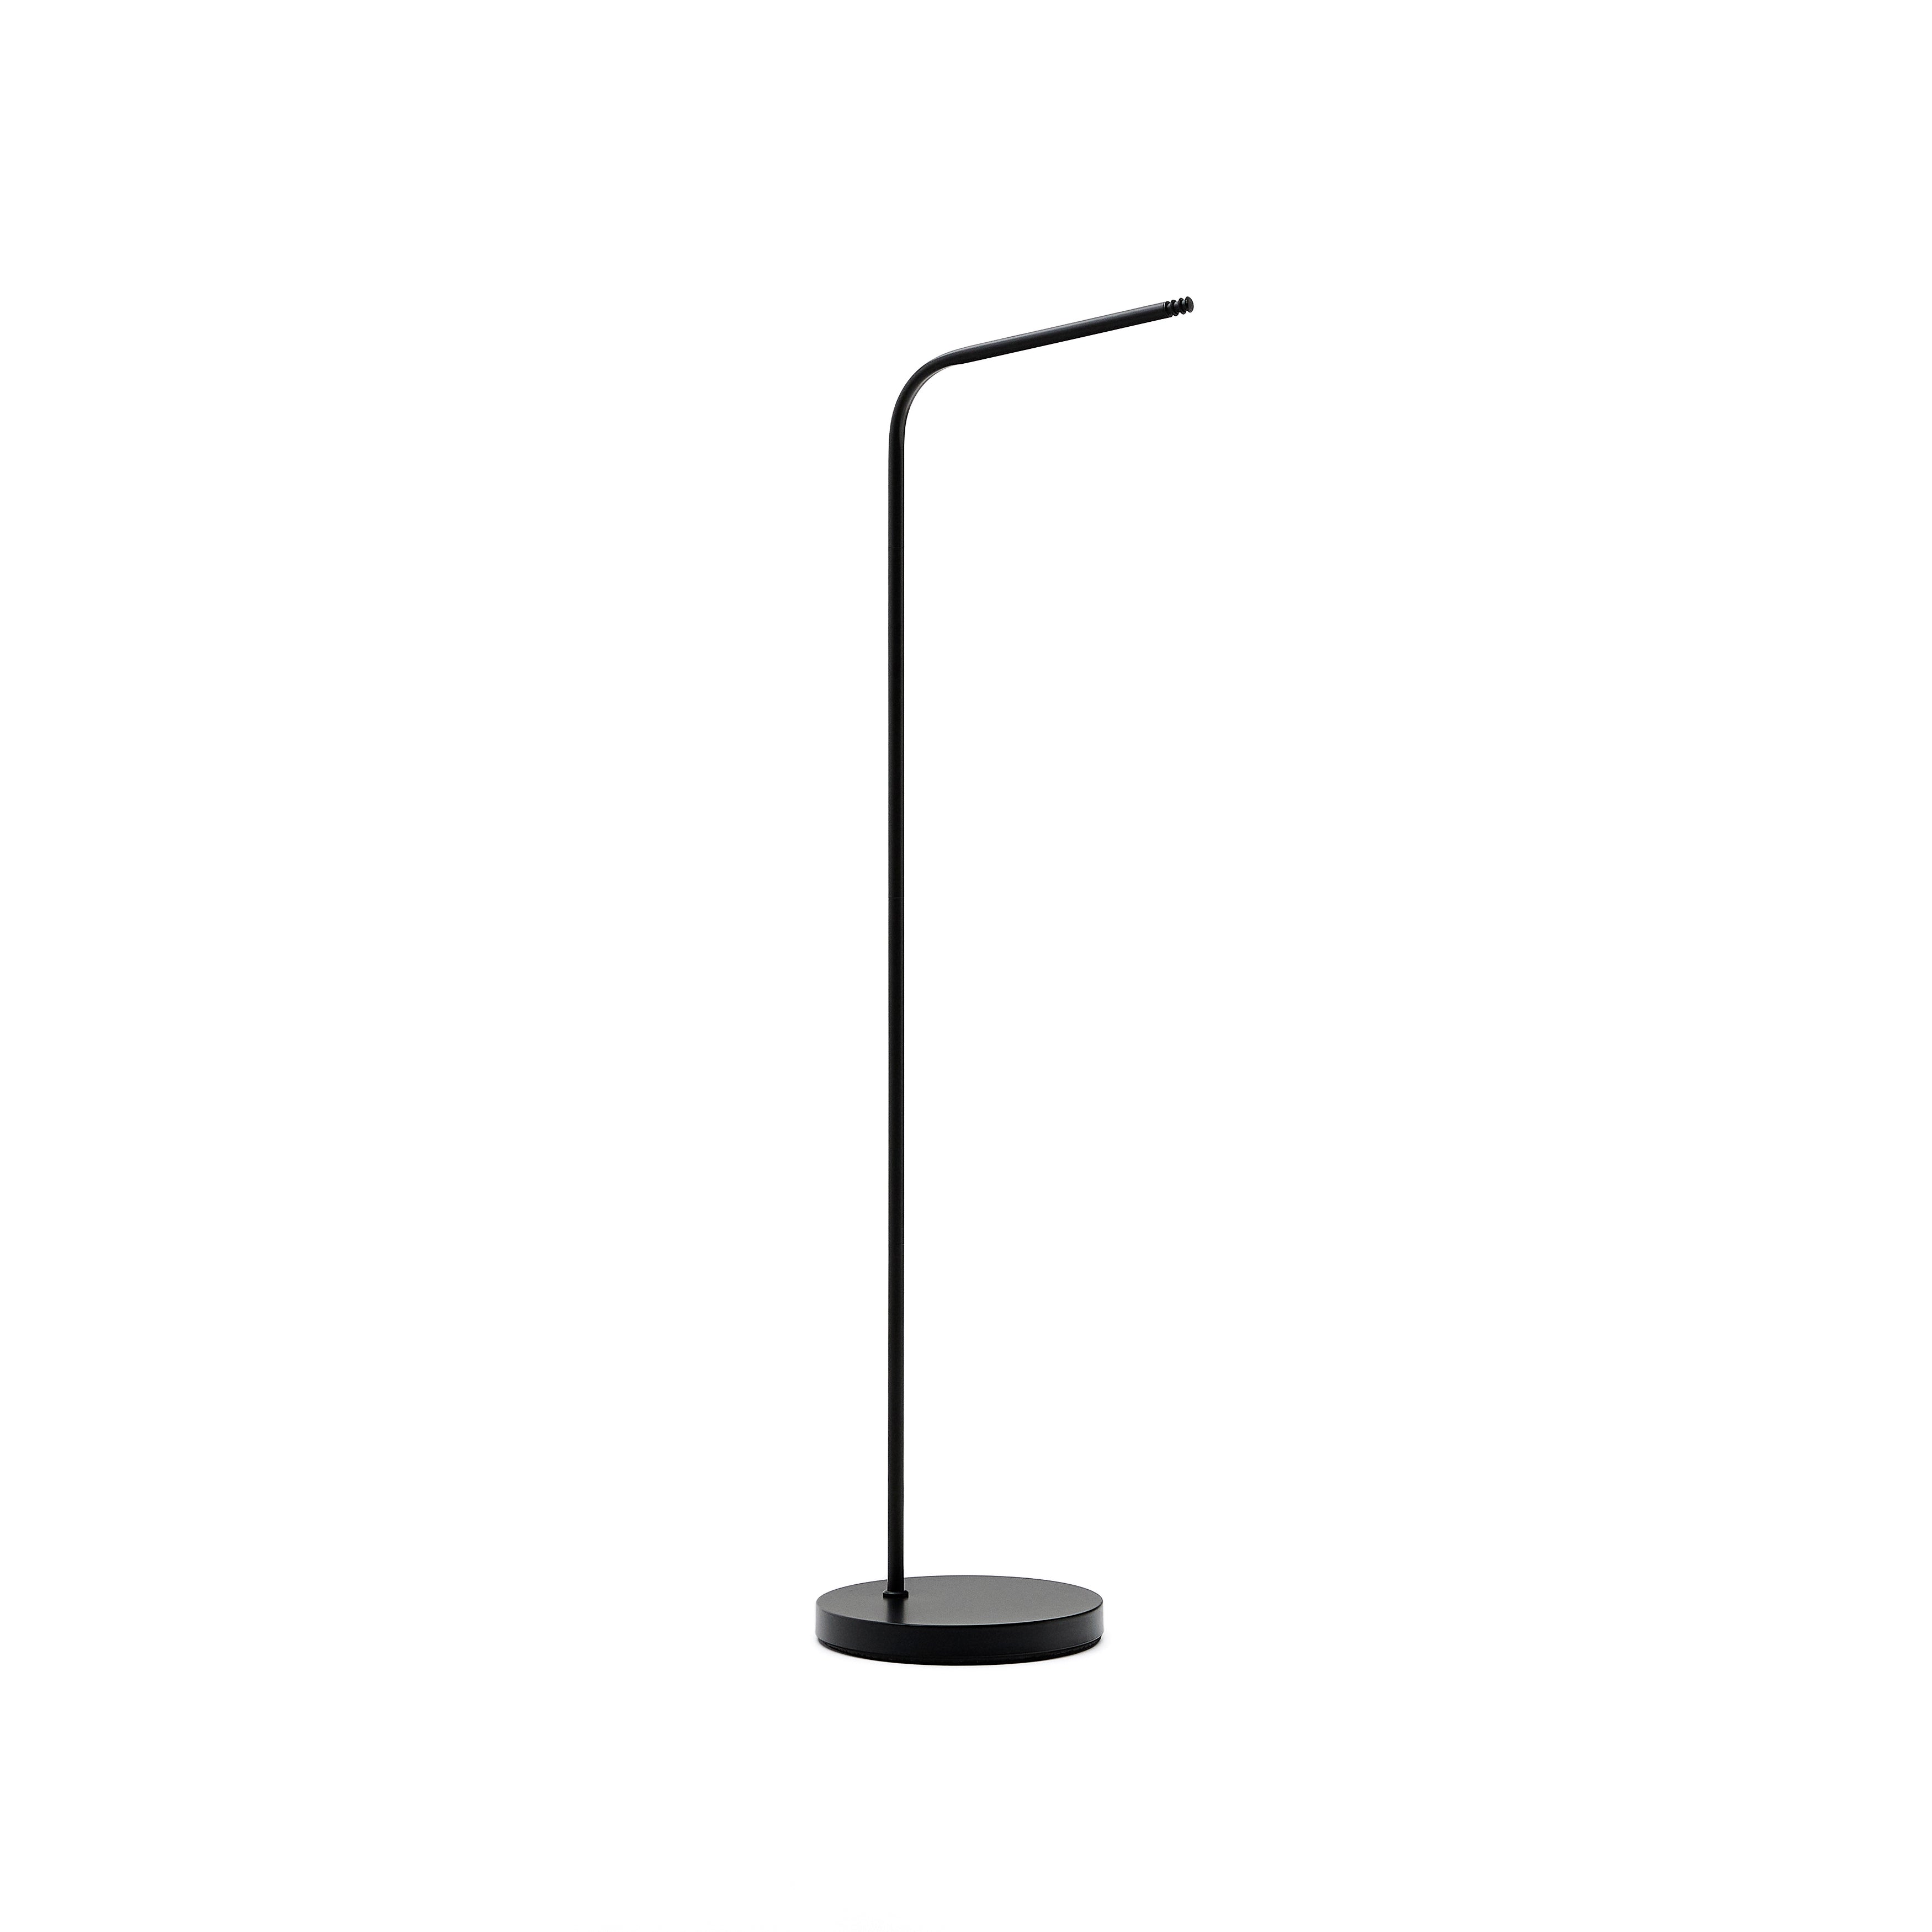 Portable lamp stand made of Nali metal with a black painted finish